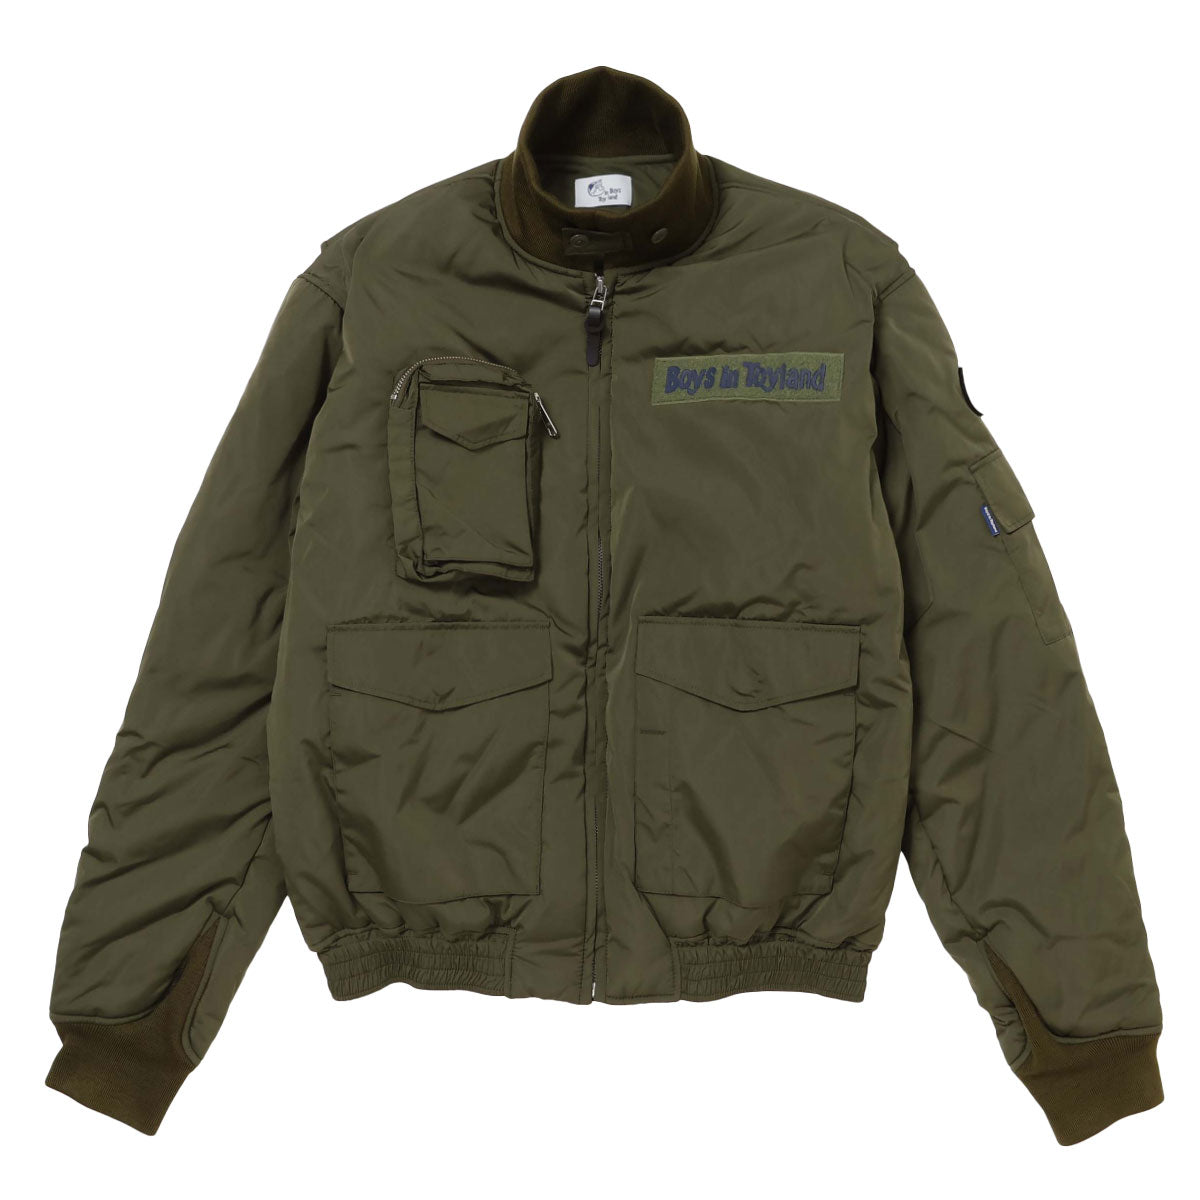 MILITARY JACKET – Why are you here?